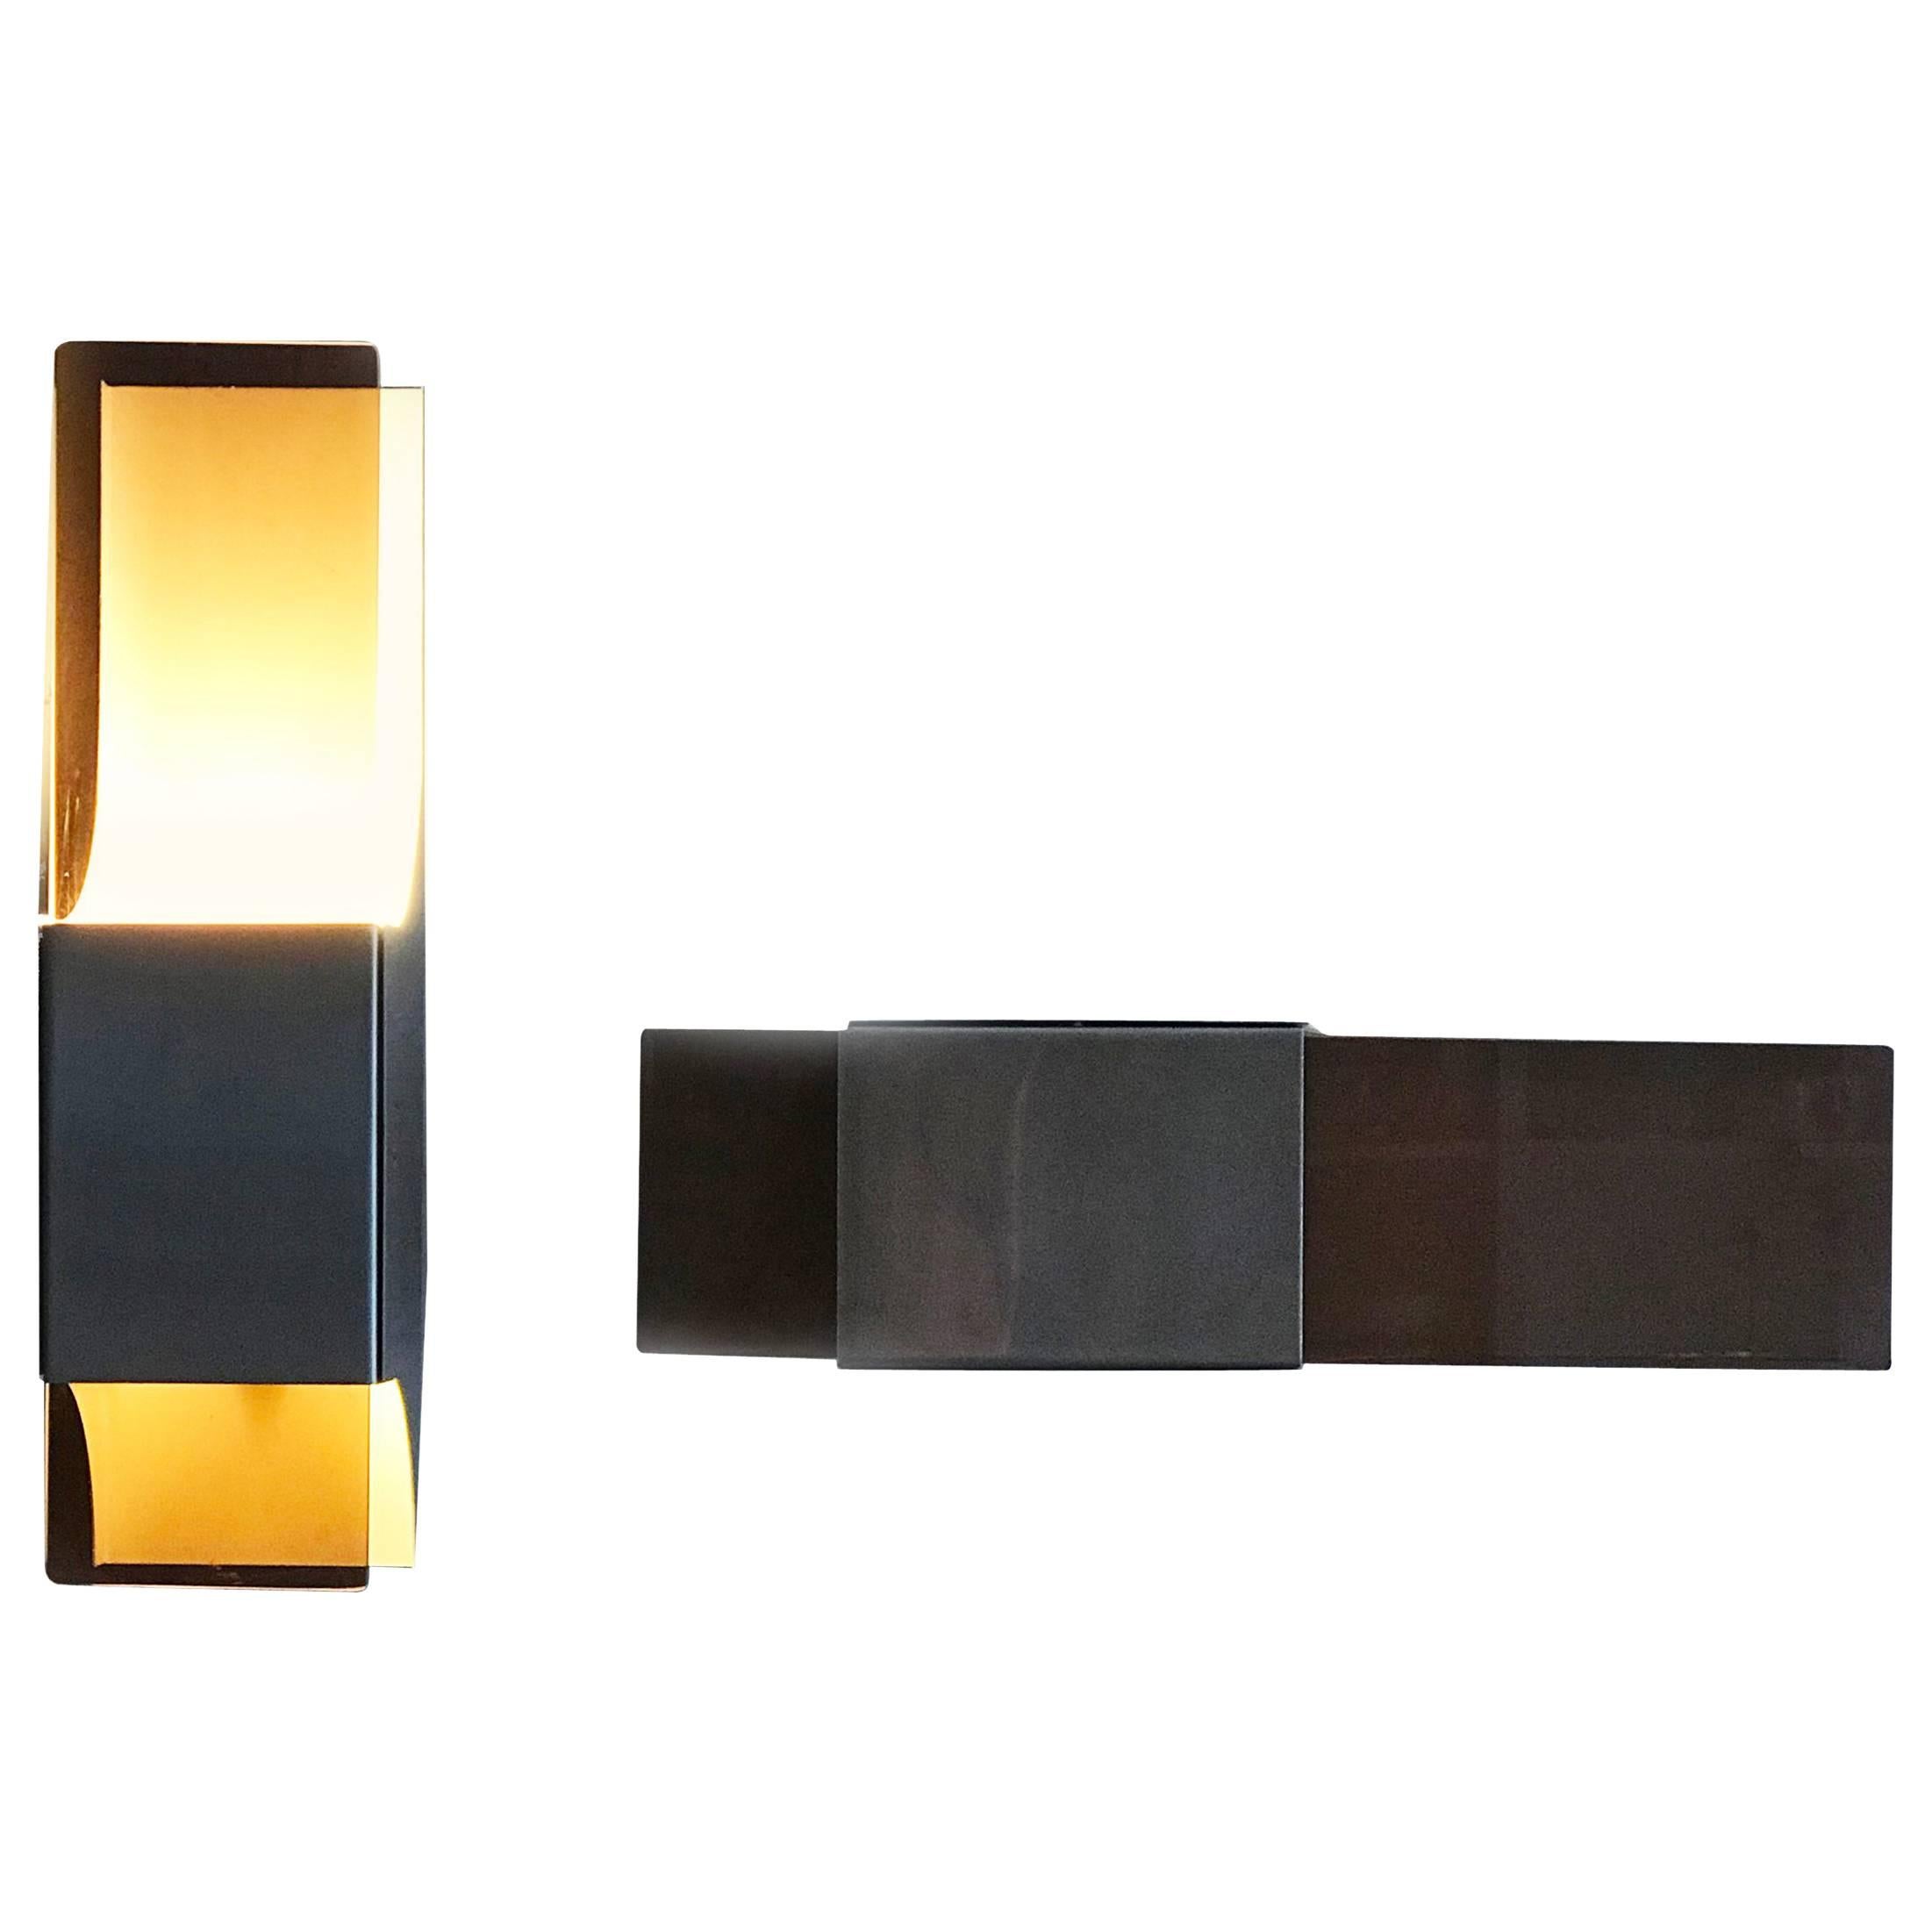 Smoked Methacrylate and Stainless Steel Sconces, 1970s, Set of Two